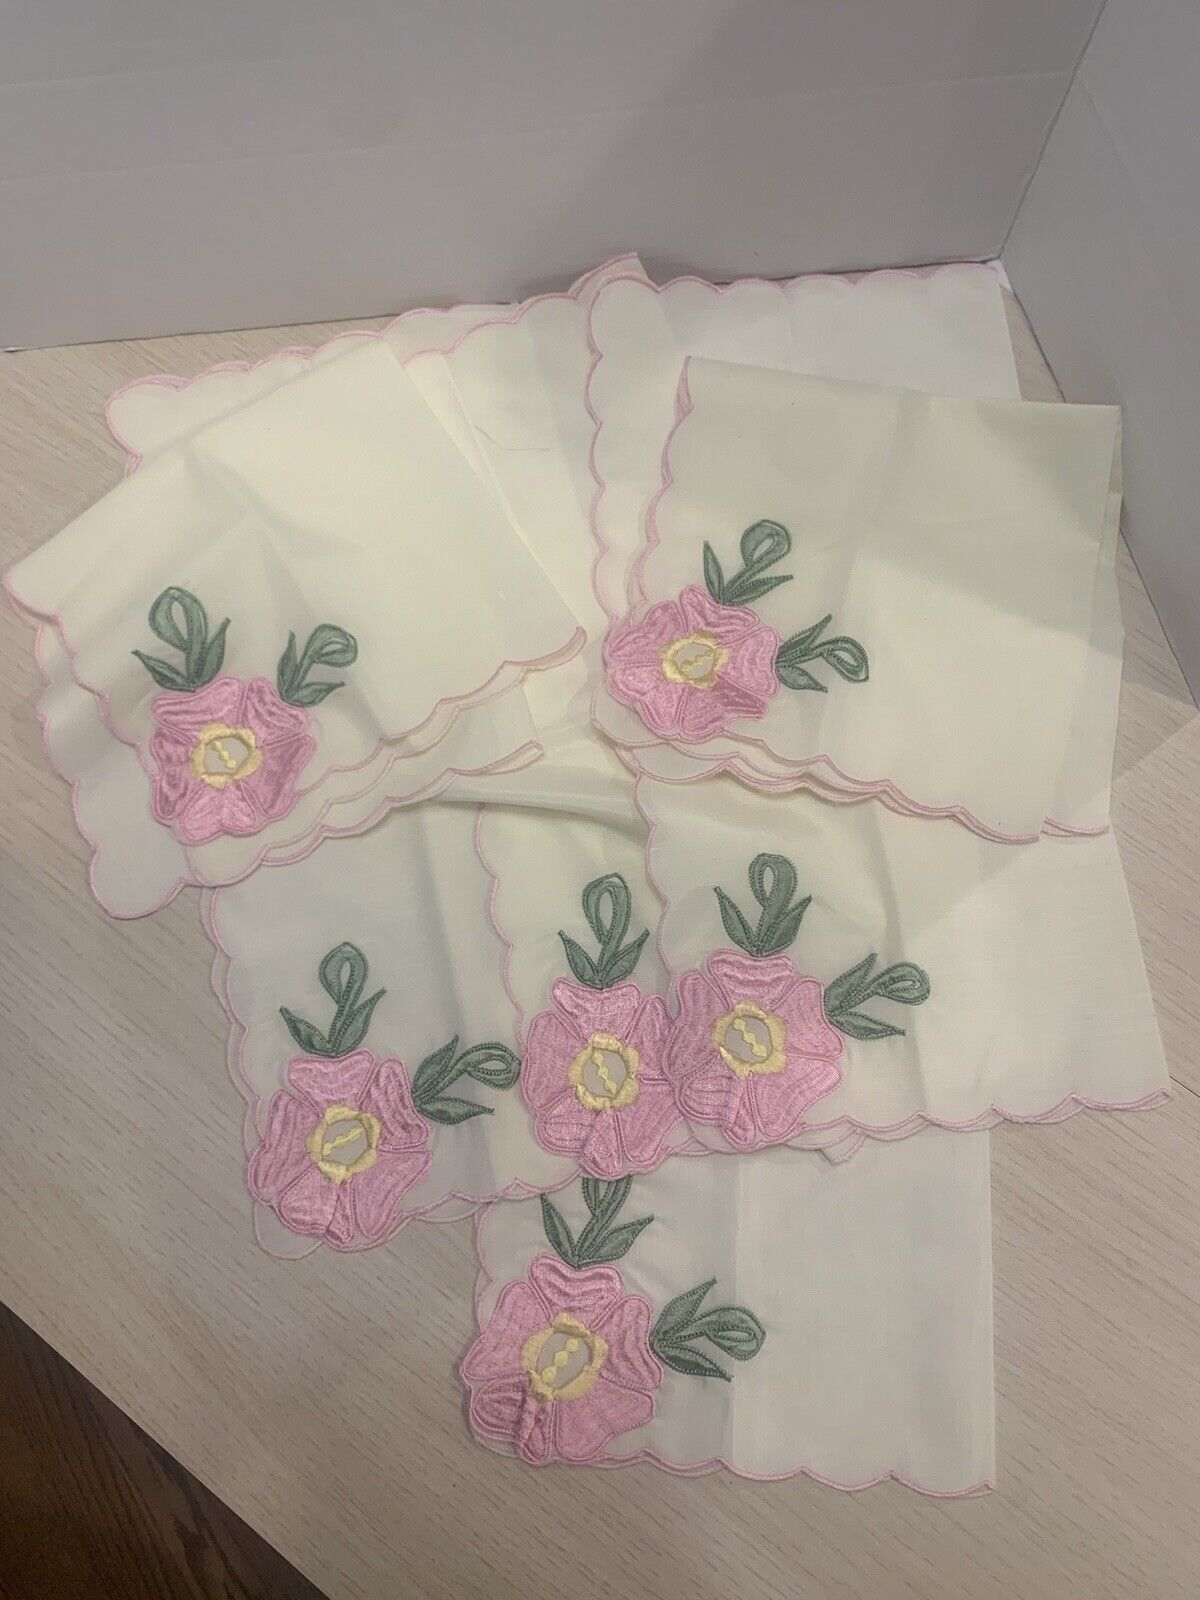 VINTAGE IVORY FLORAL EMBROIDERED NAPKINS -6 Pieces 15.5” X 15.5”